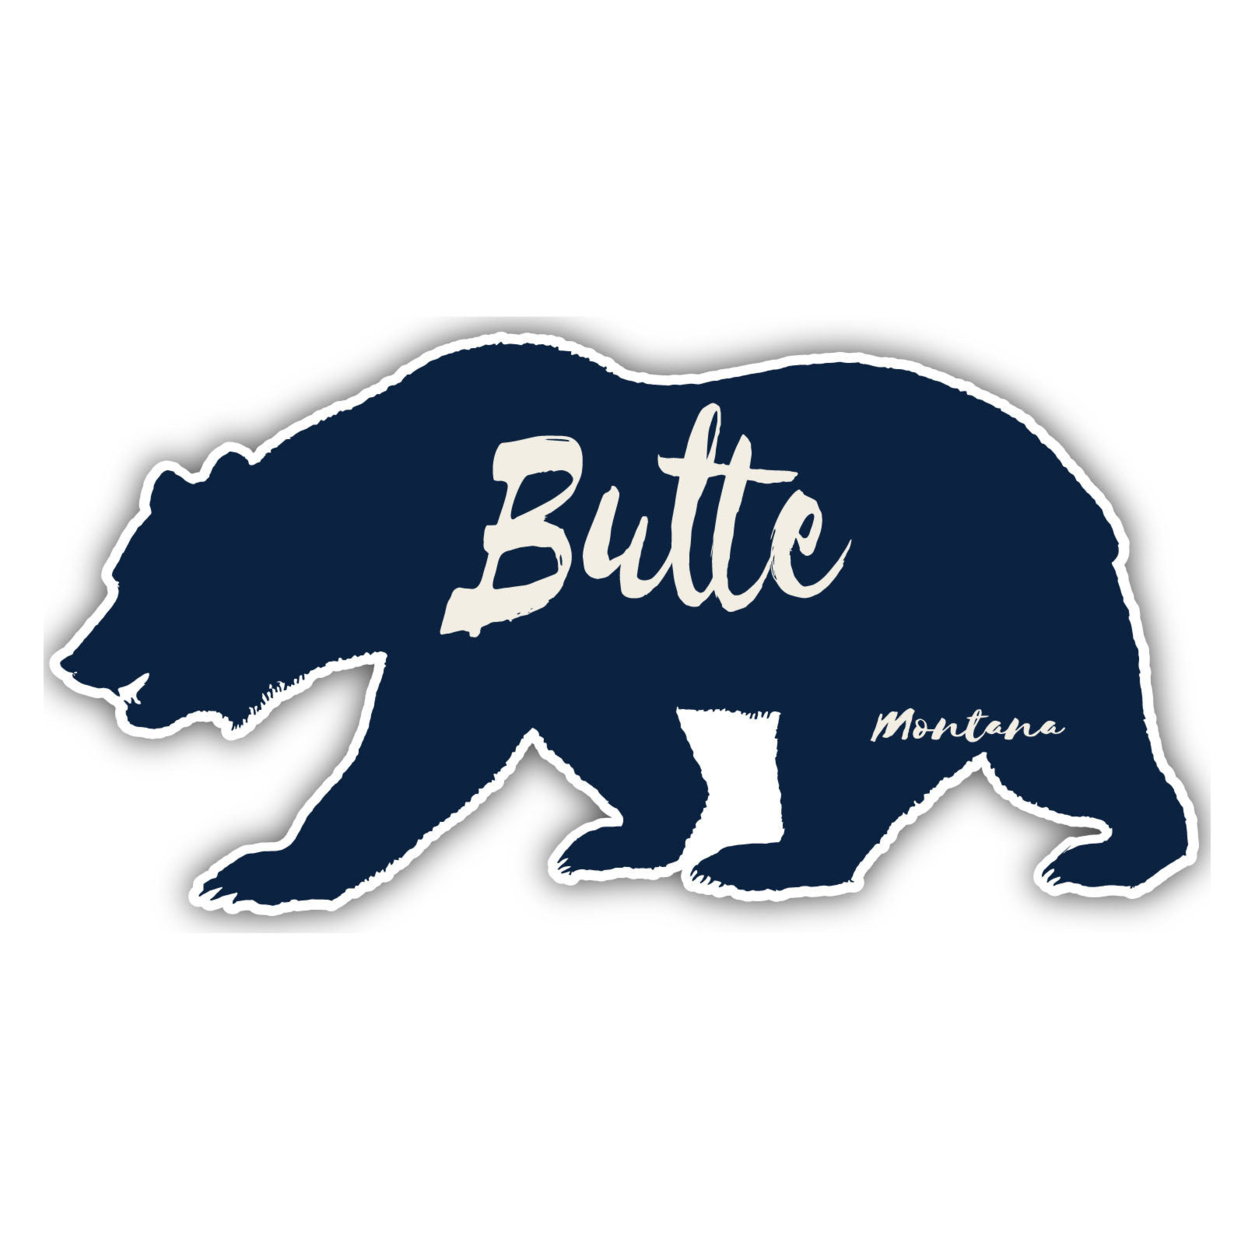 Butte Montana Souvenir Decorative Stickers (Choose Theme And Size) - 4-Pack, 10-Inch, Bear